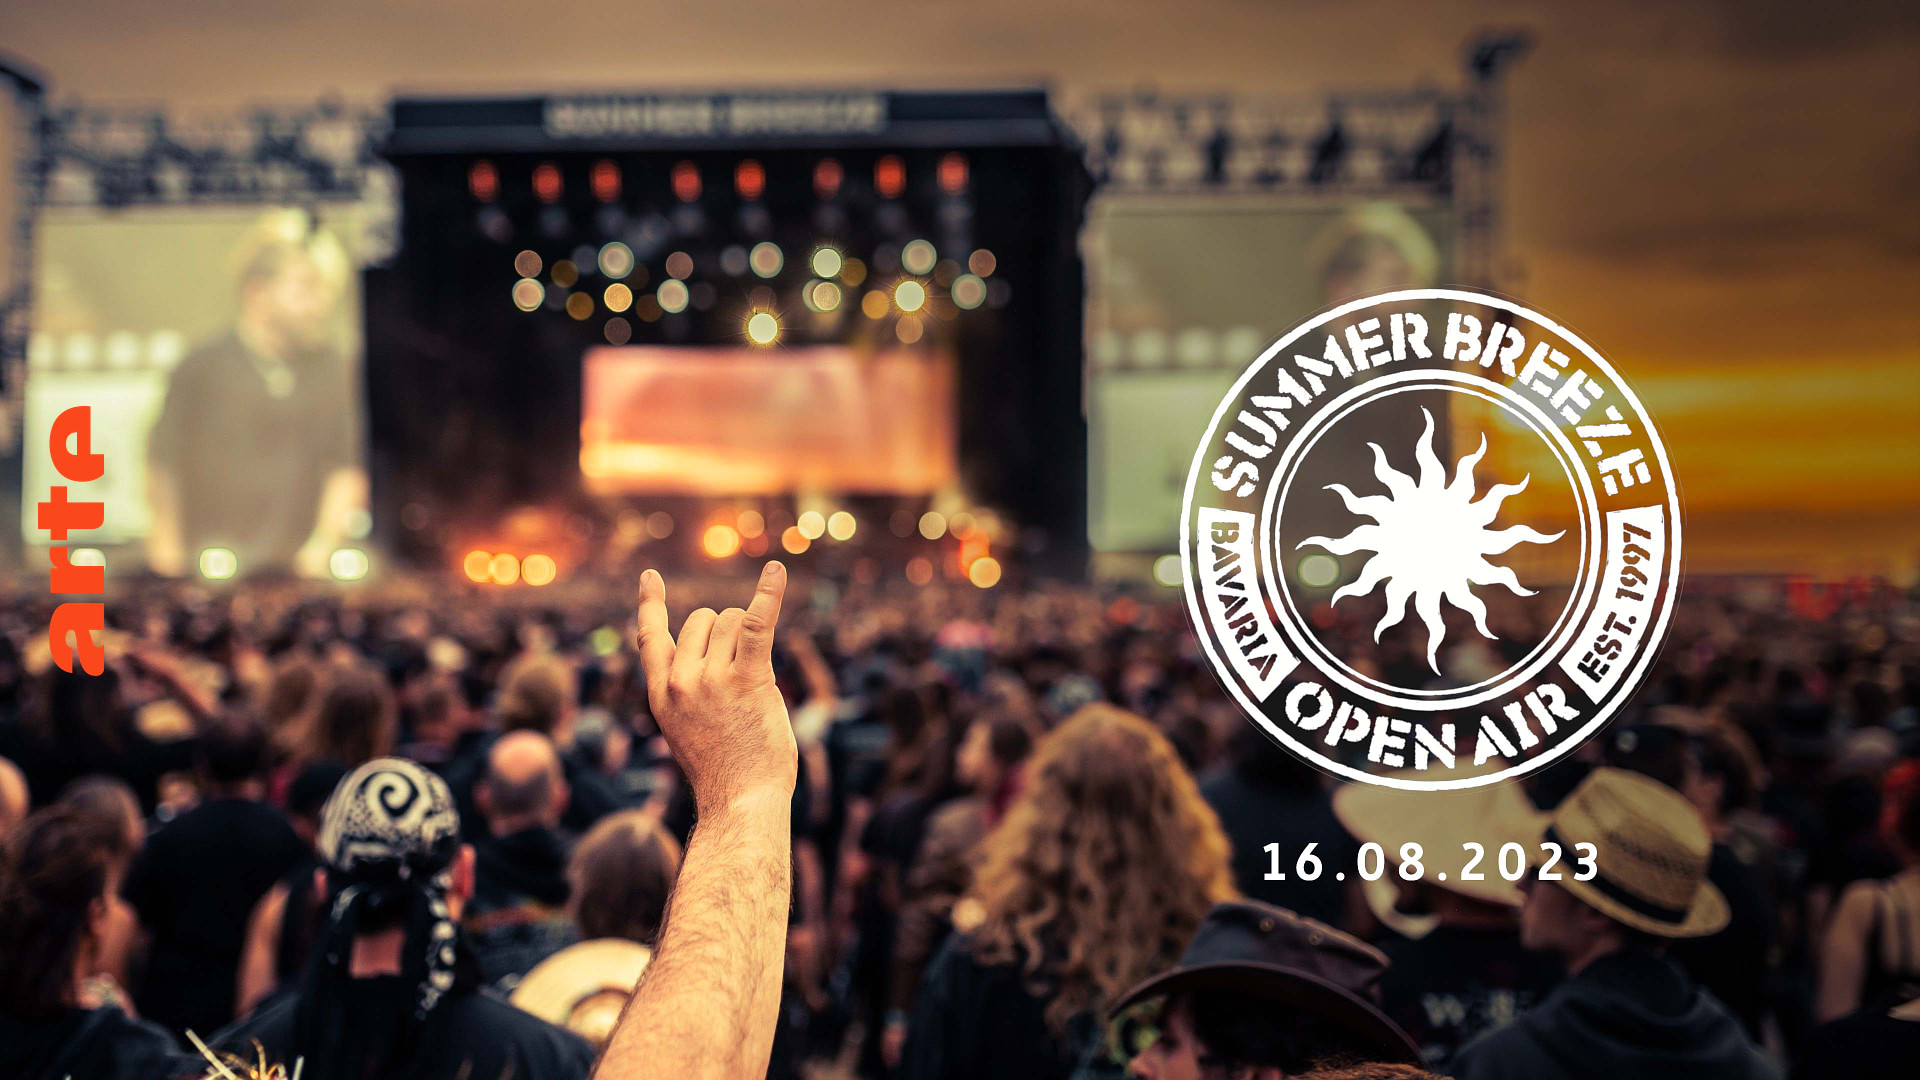 Summer Breeze Open Air: Germany’s Premier Rock and Metal Festival Unites Top Artists in Epic Lineup!